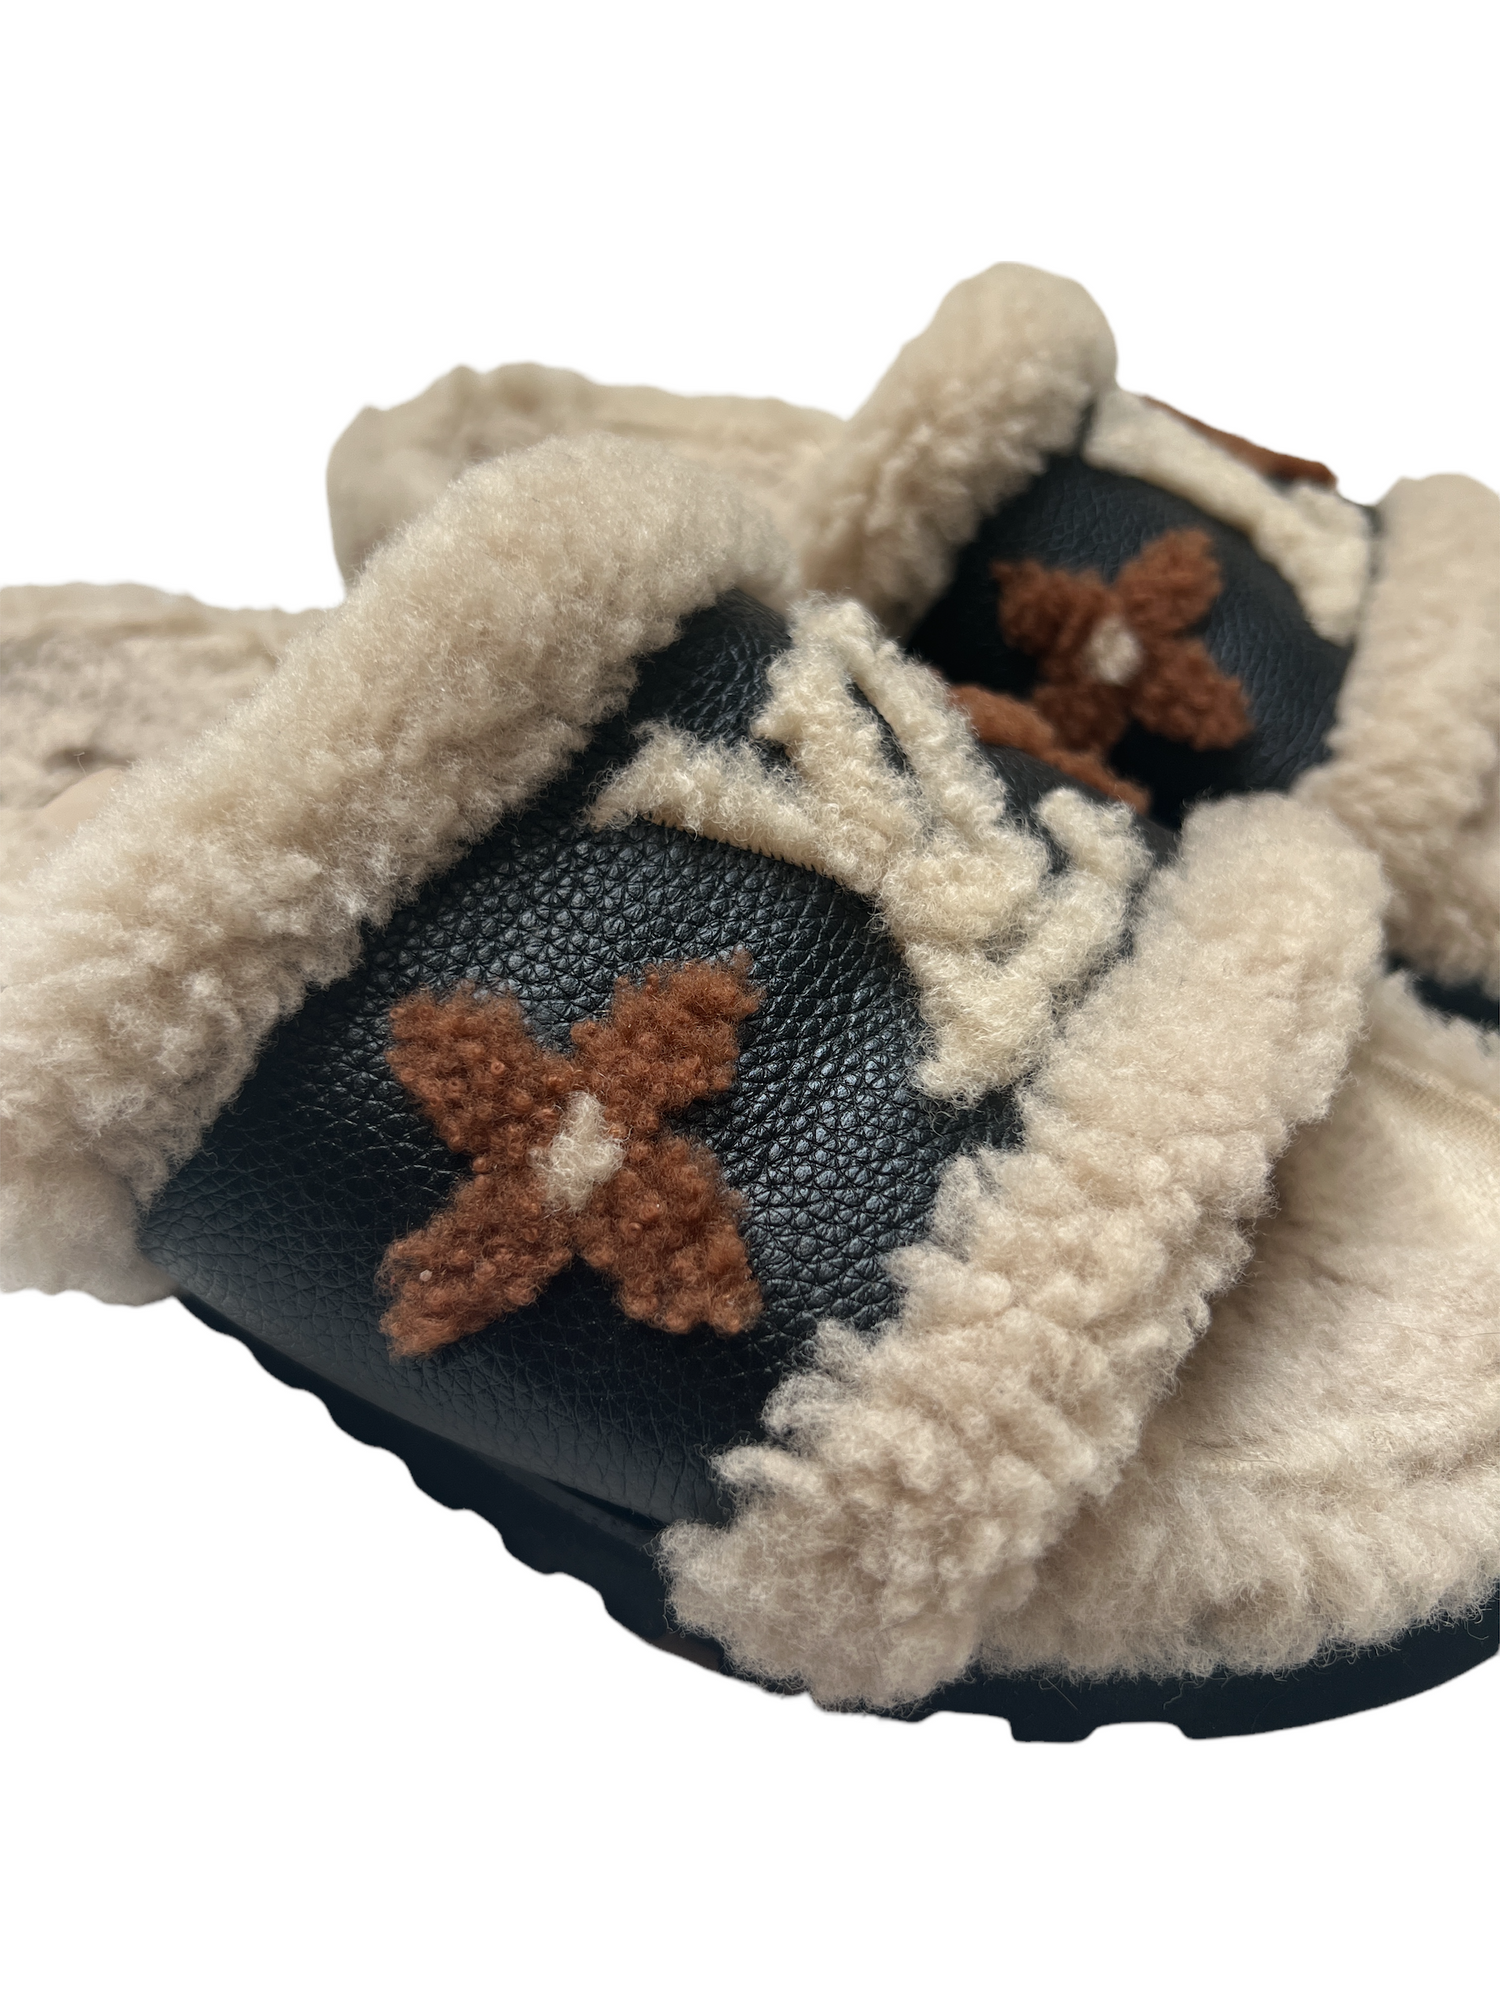 Louis Vuitton Two Tone Leather and Shearling Fur Paseo Slides Size 38